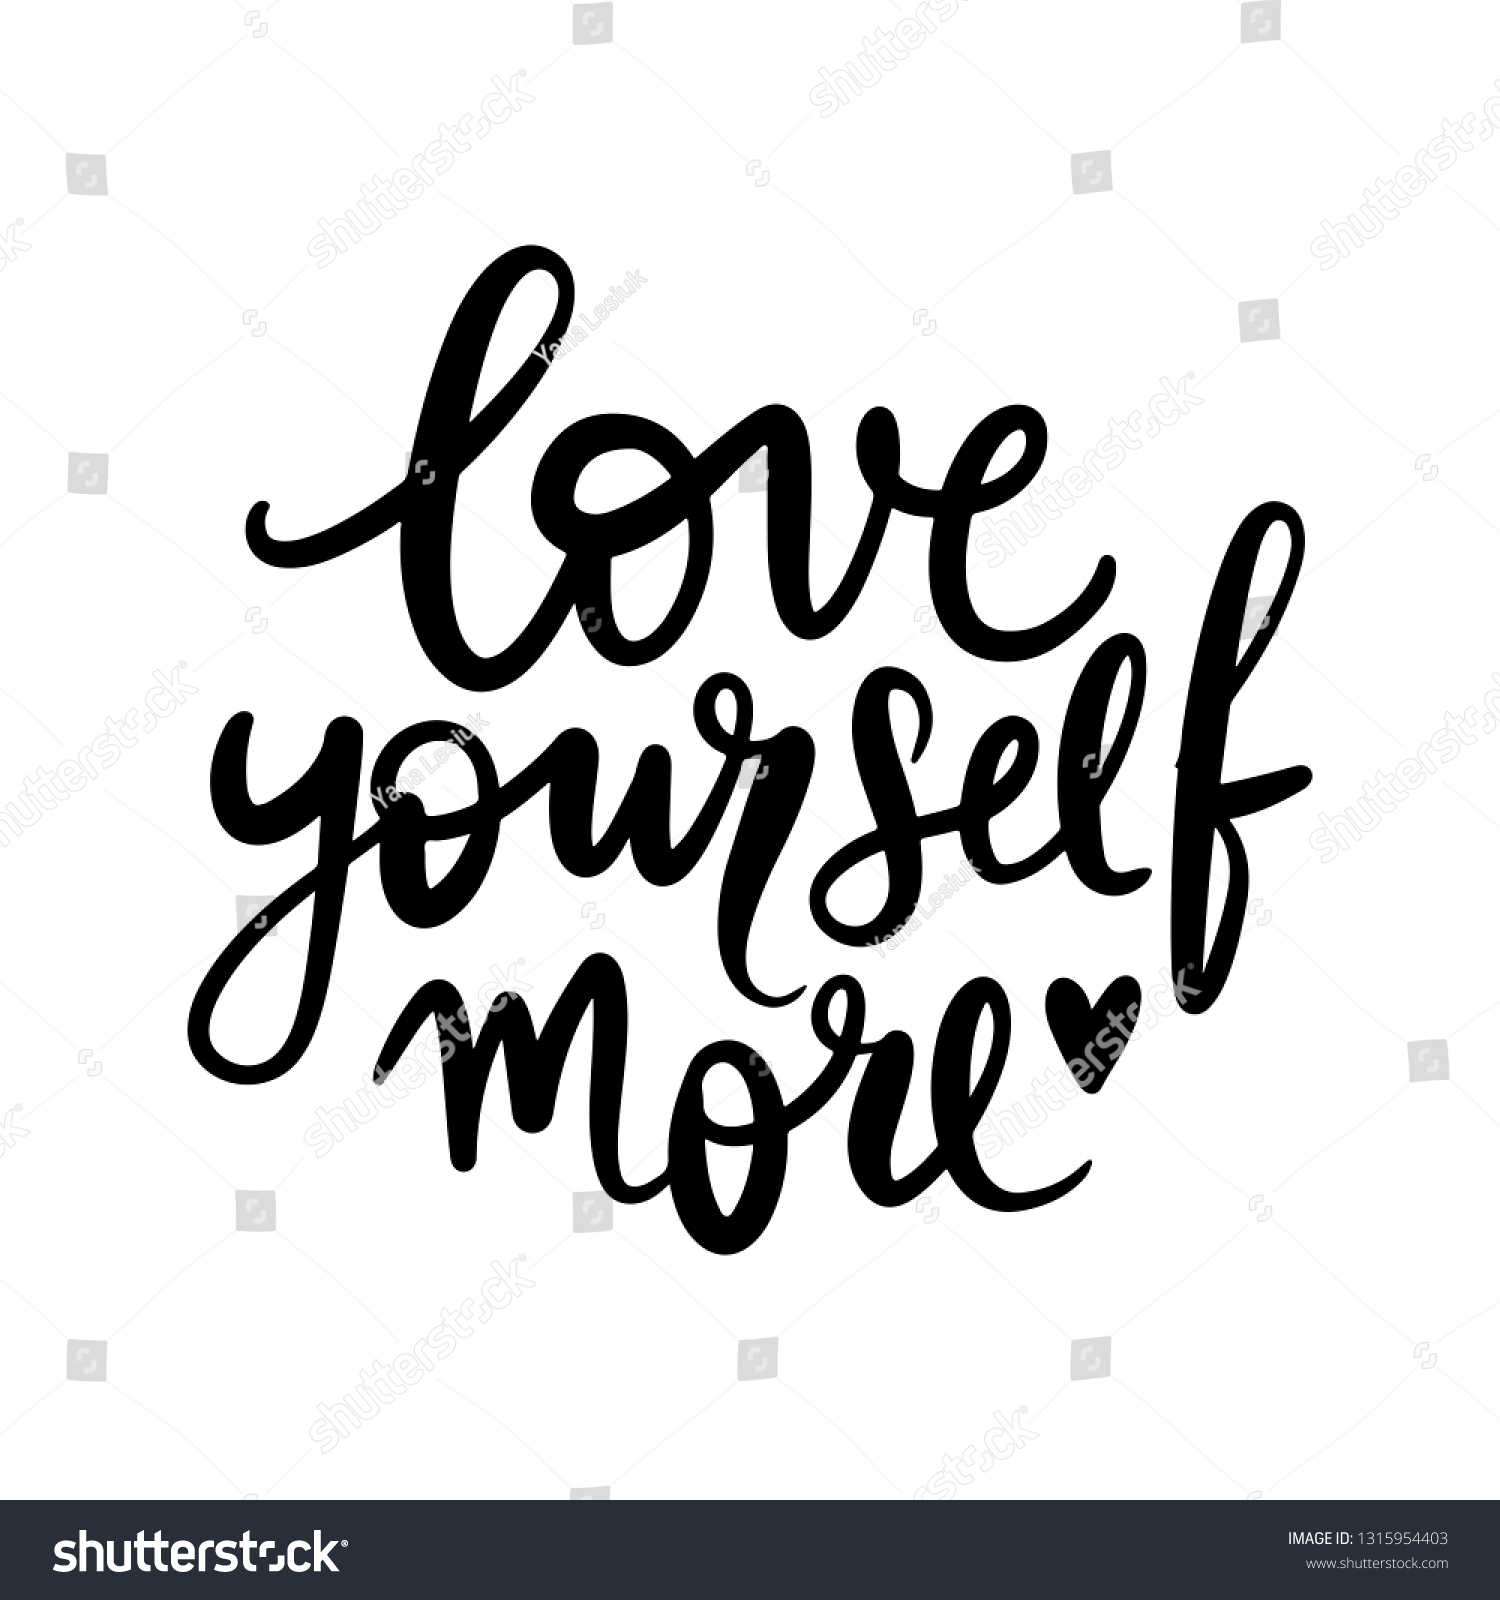 Love Yourself More Vector Hand Drawn Stock Vector Royalty Free 1315954403